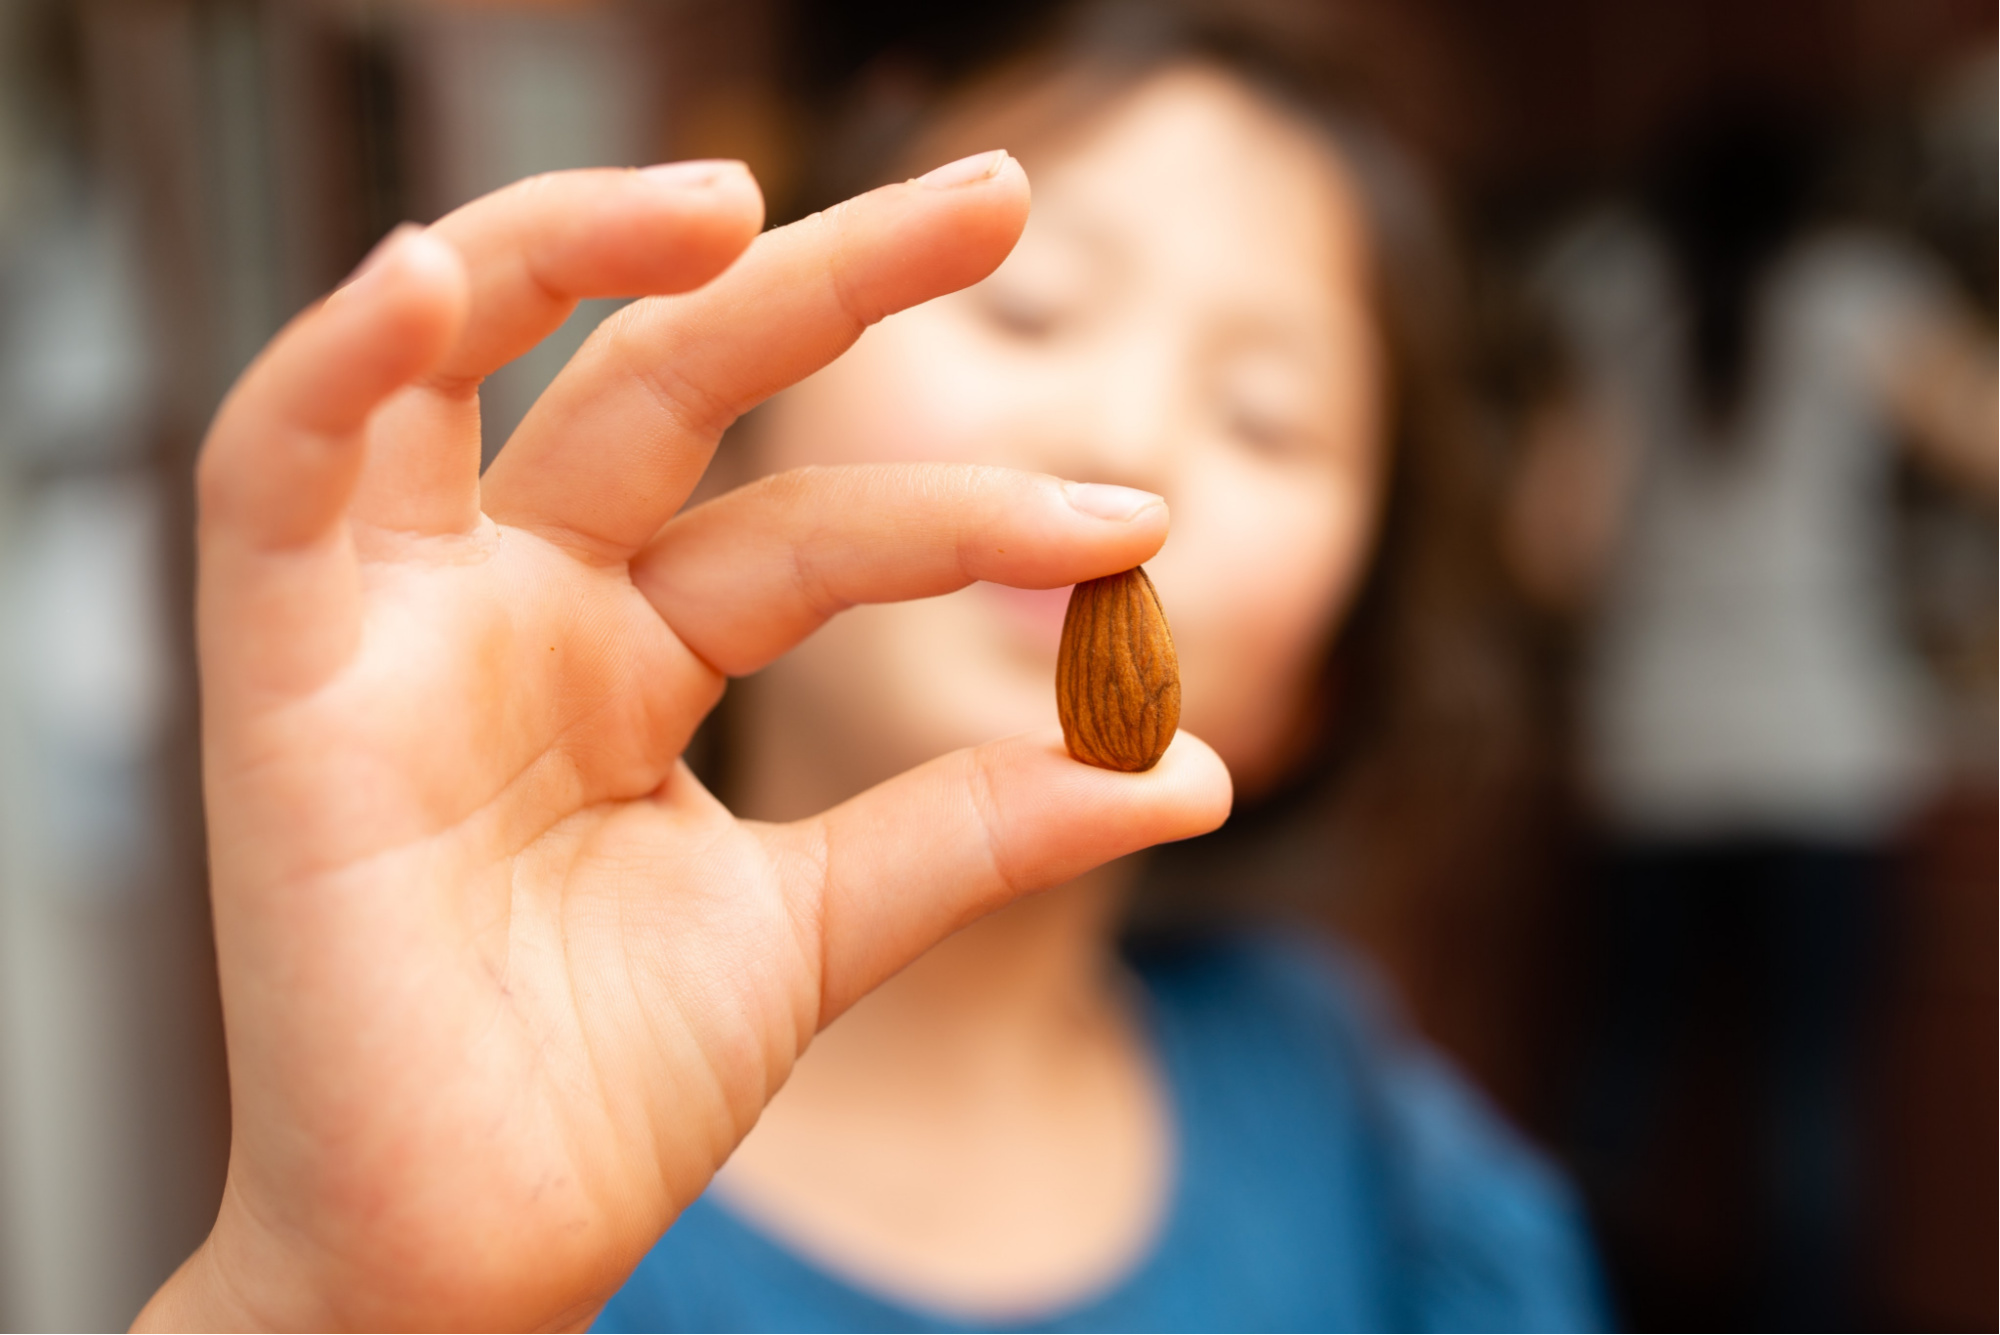 Caregiving Means Every Almond Counts